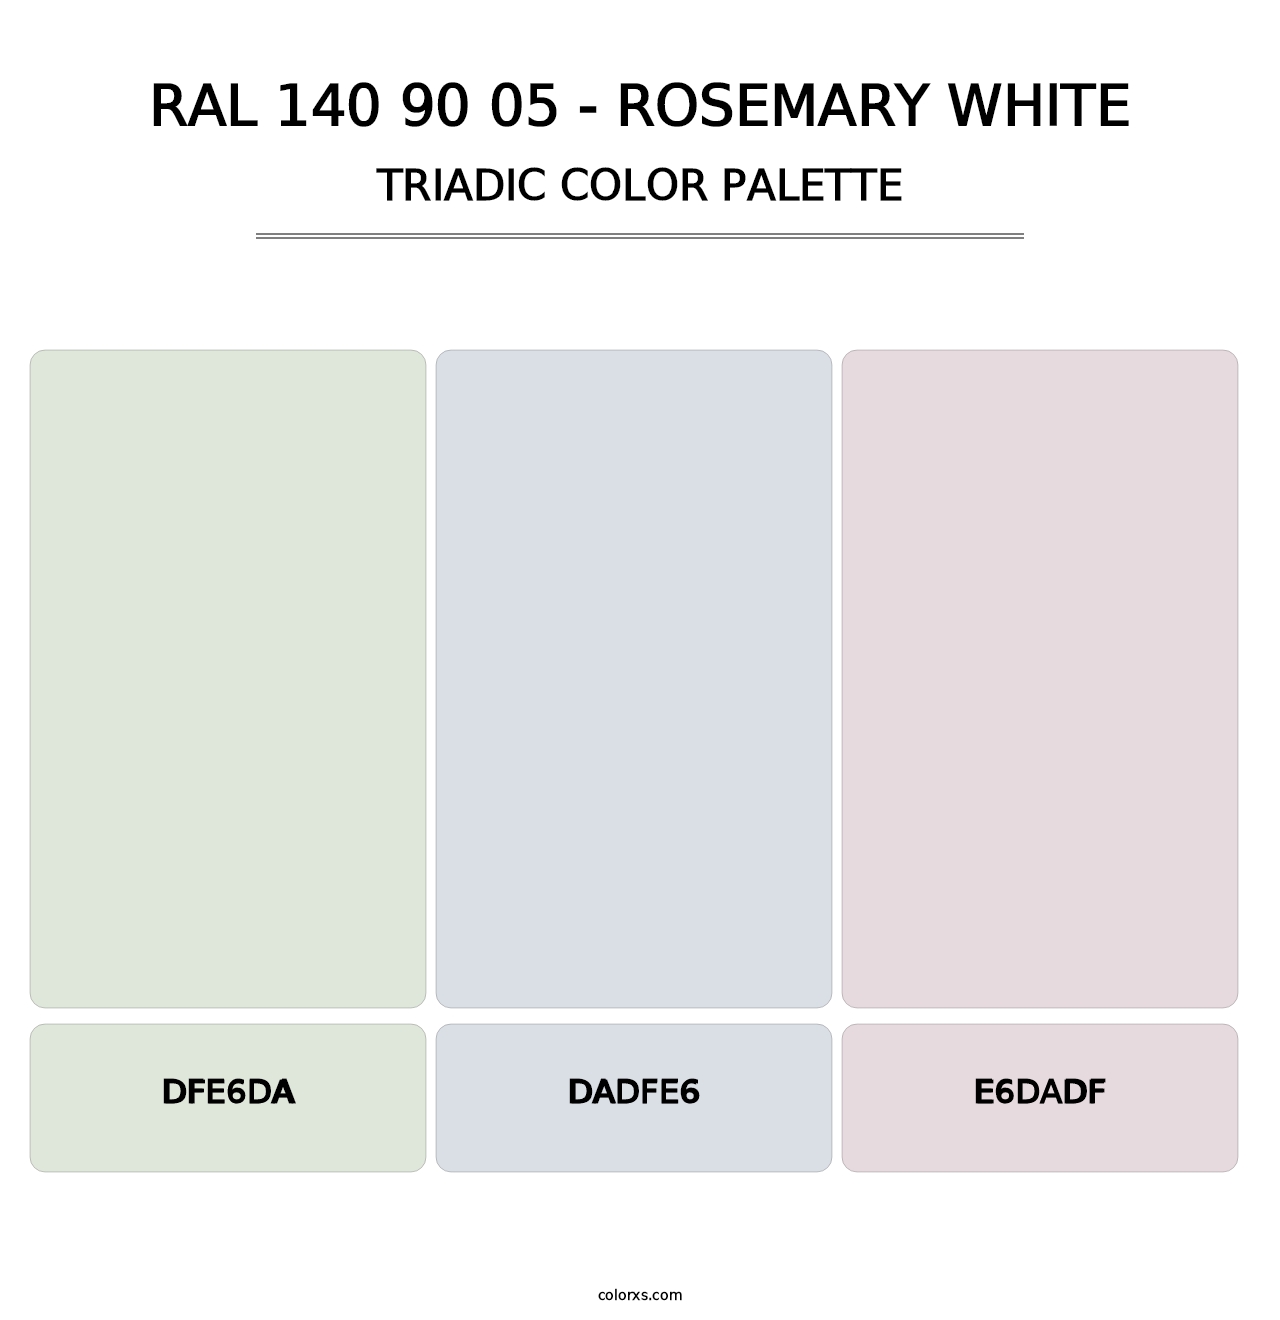 RAL 140 90 05 - Rosemary White - Triadic Color Palette